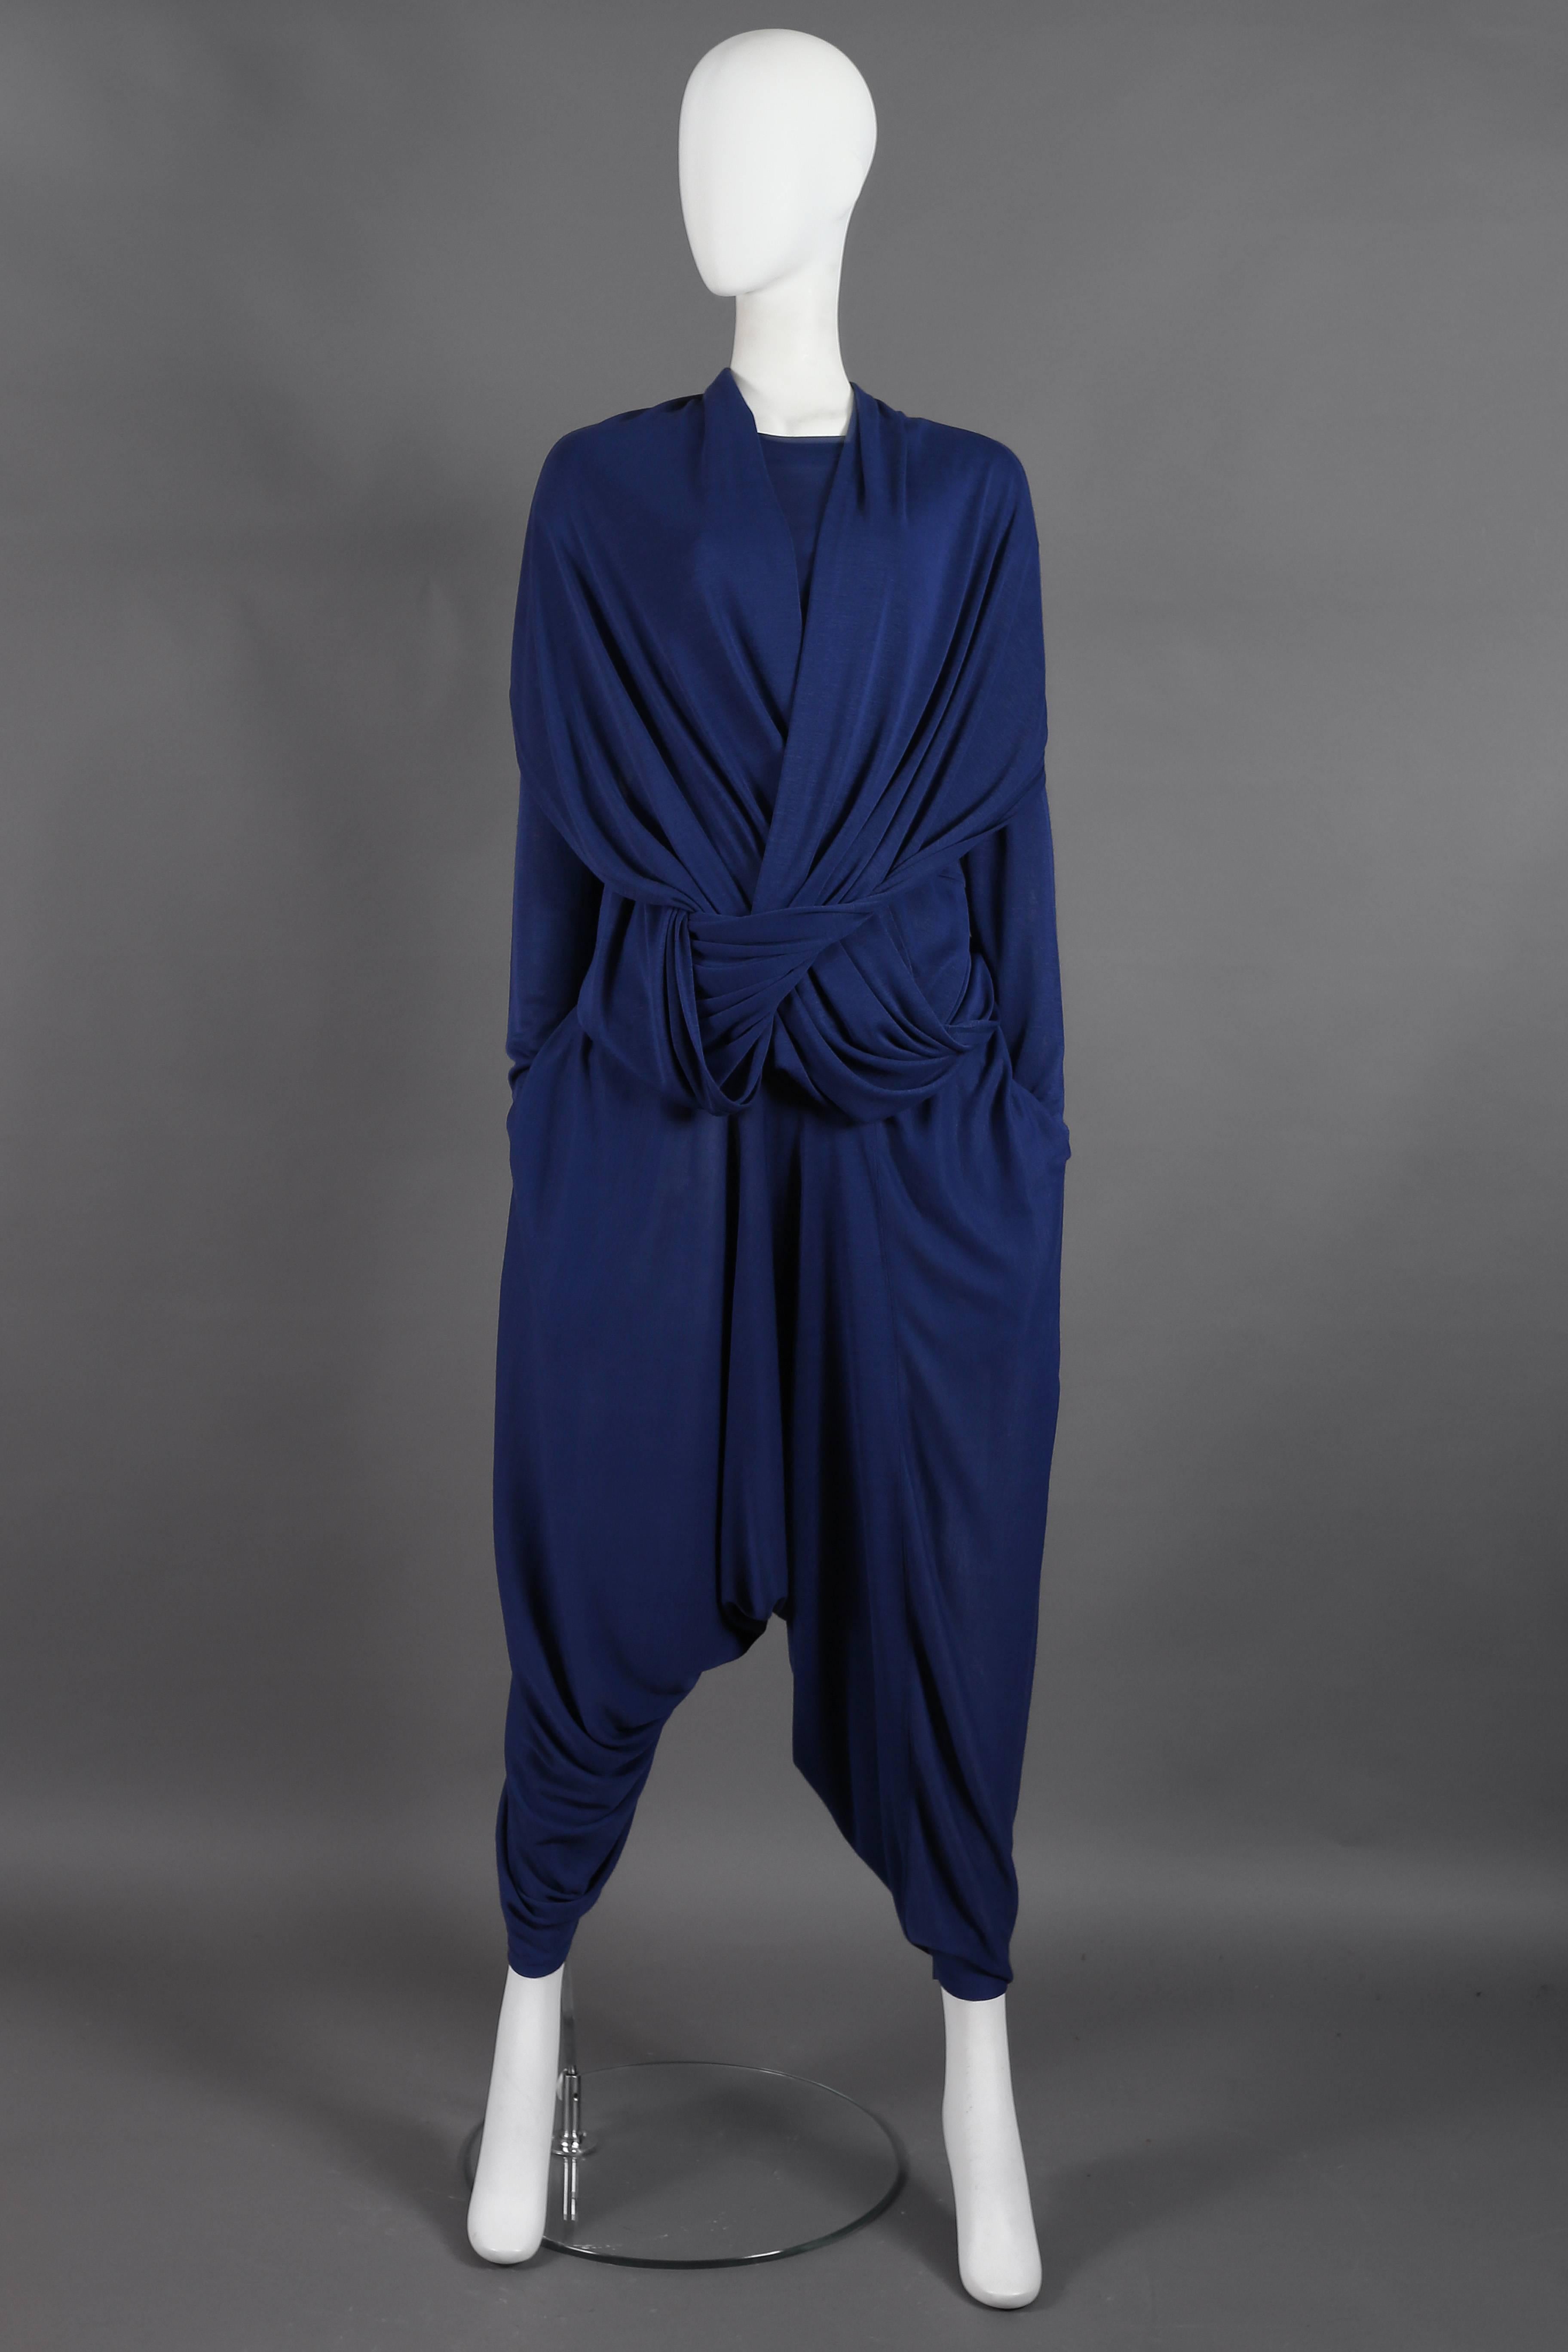 Presenting an exceptional Issey Miyake knitted 2-piece pant suit, a true treasure from the illustrious 1980s era. This unique suit showcases Issey Miyake's signature design ingenuity and artistry.

The harem-style pants exude a sense of comfort and